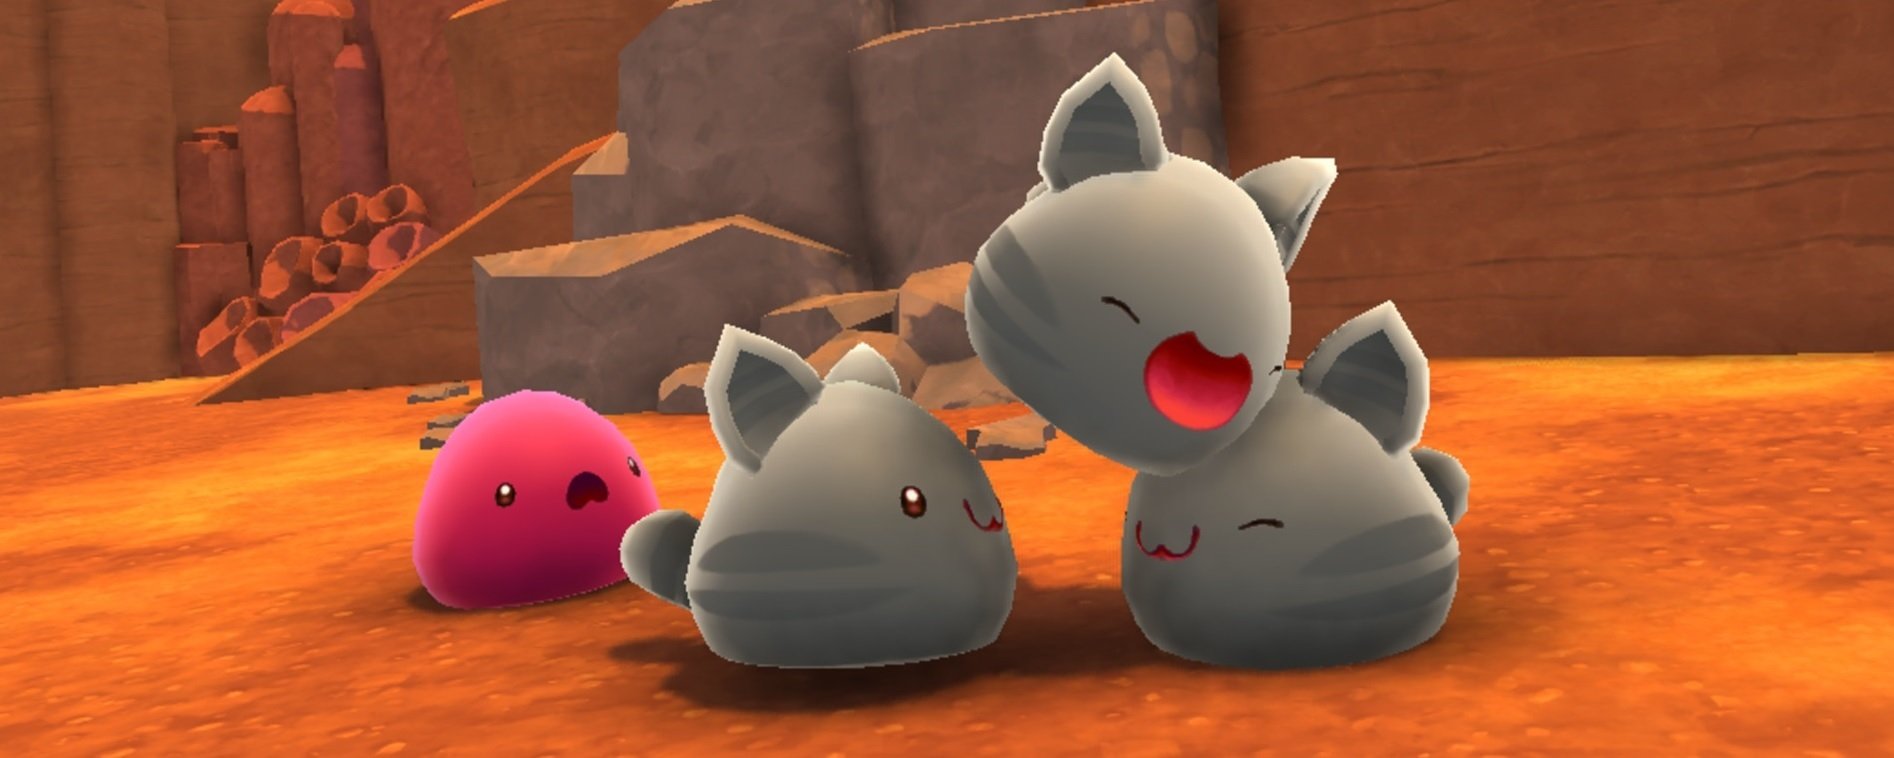 Slime Rancher 2: tips for beginners — Ten tips to grow your ranch FAST